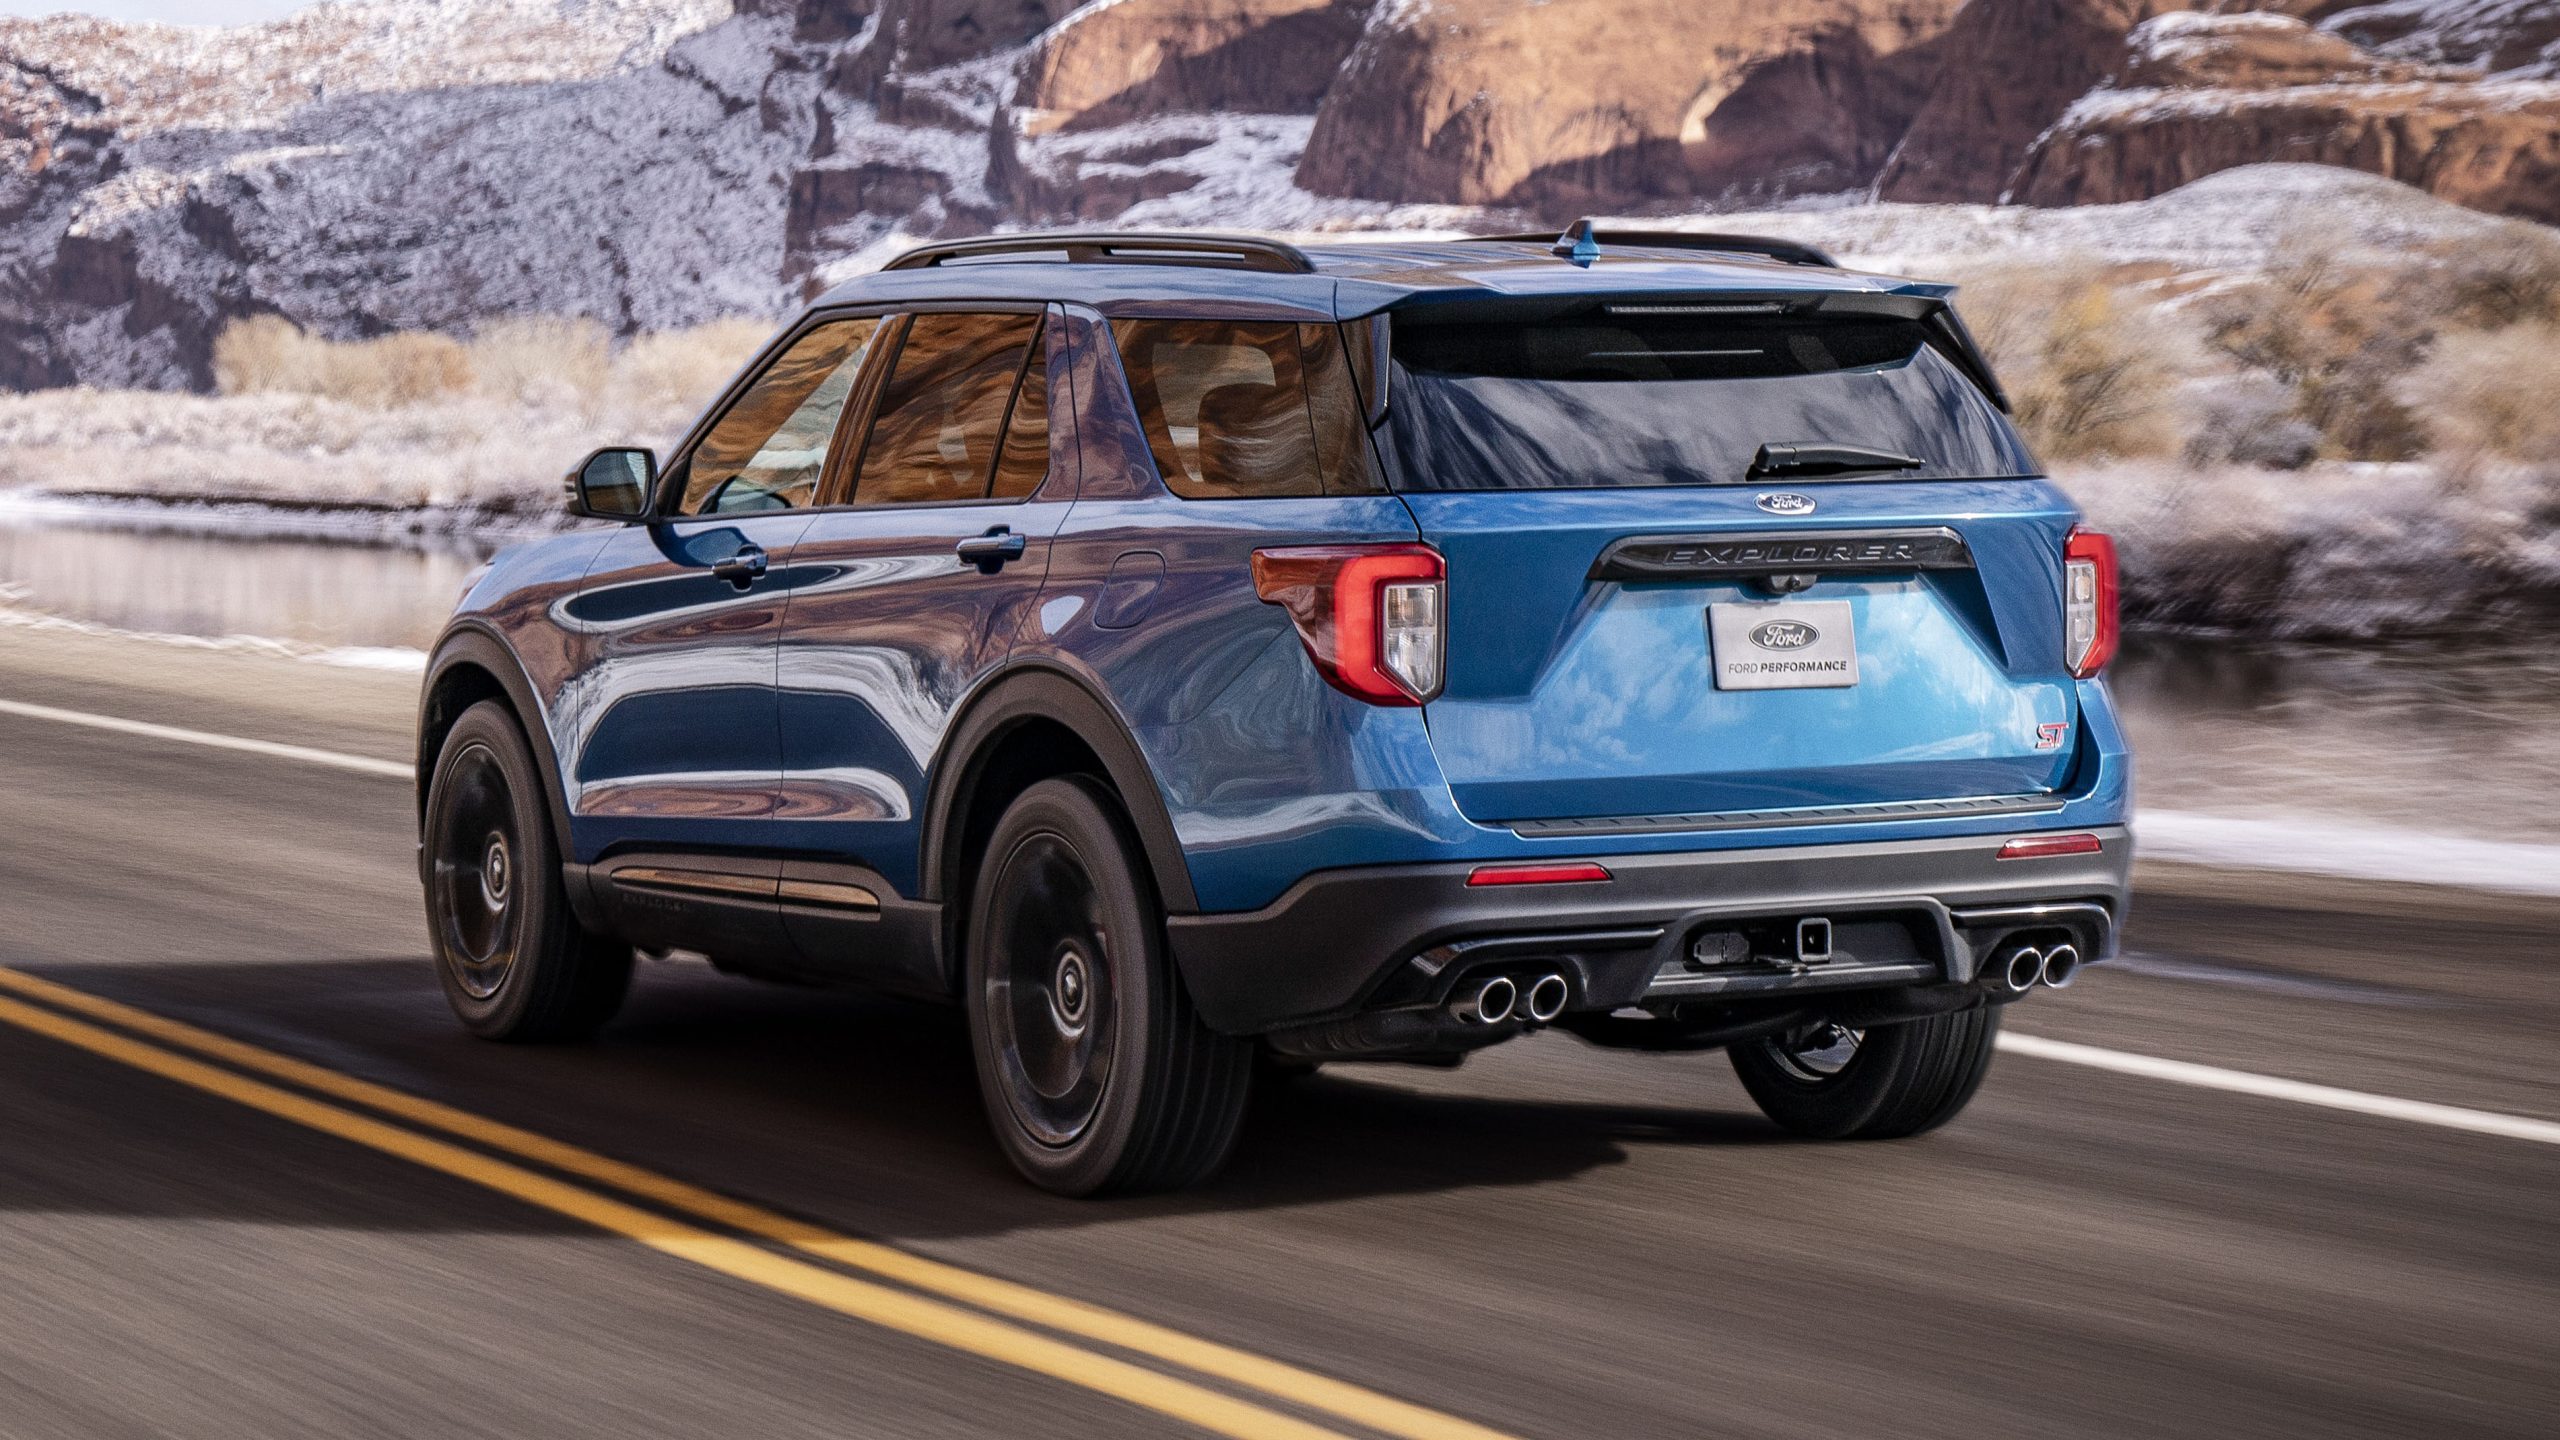 Engineered by the Ford Performance team, Explorer ST uses a specially tuned 3.0-liter EcoBoost® engine projected to achieve 400 horsepower and 415 lb.-ft. of torque. A top speed target for track drivers stands at 143 mph.